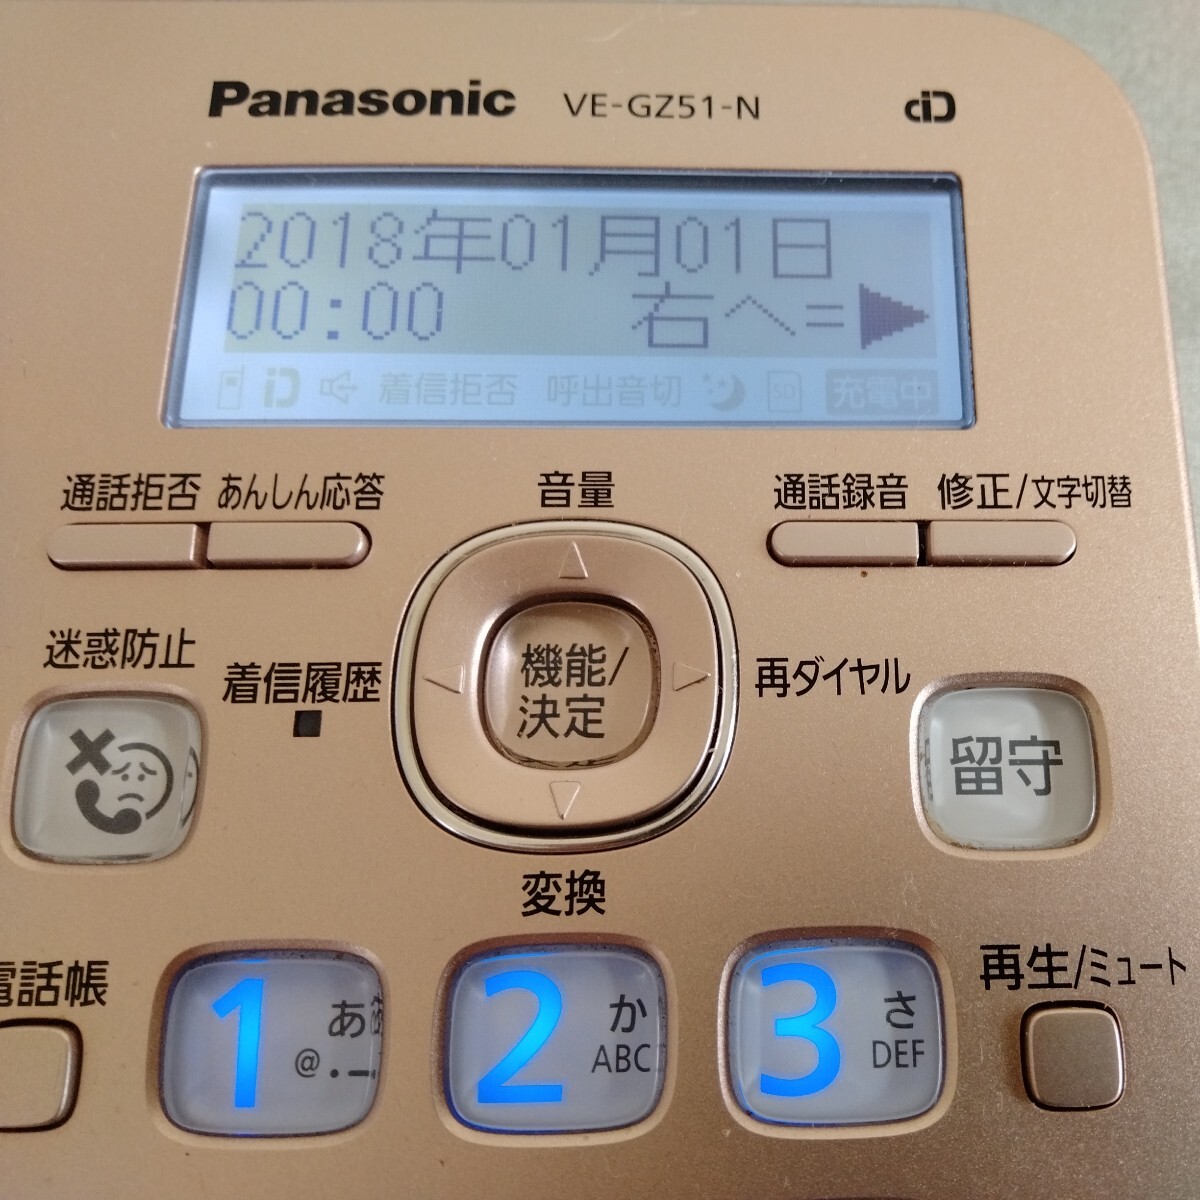 Panasonic Panasonic cordless telephone machine VE-GZ51-N indoor keeping goods present condition delivery nursing . absence /.. ground ... contact later shipping is week 1 times. 